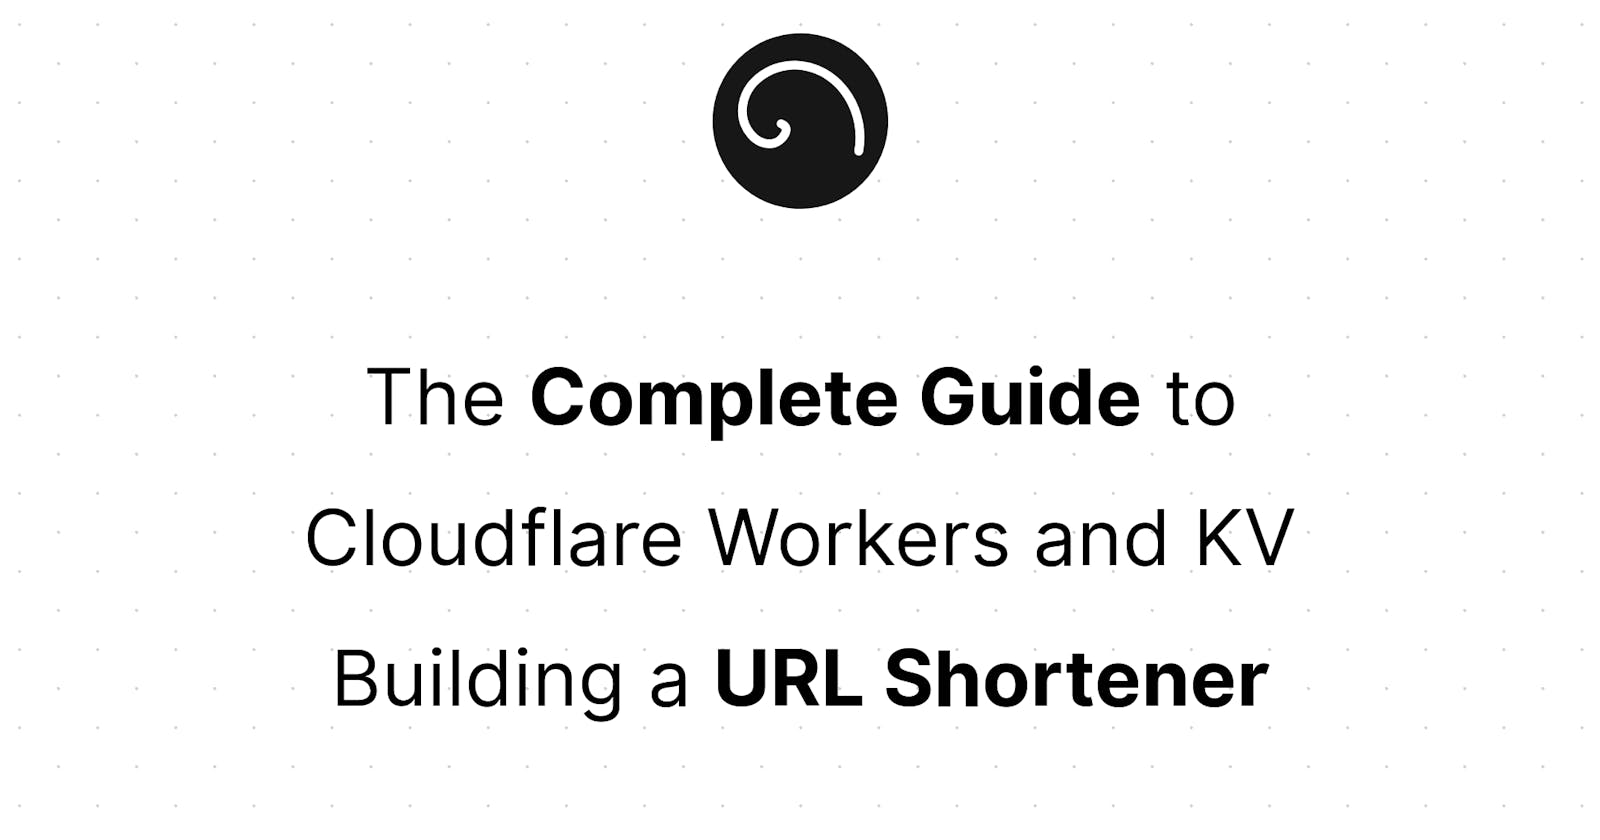 How I built a URL Shortener with Cloudflare Workers and KV - A Tutorial